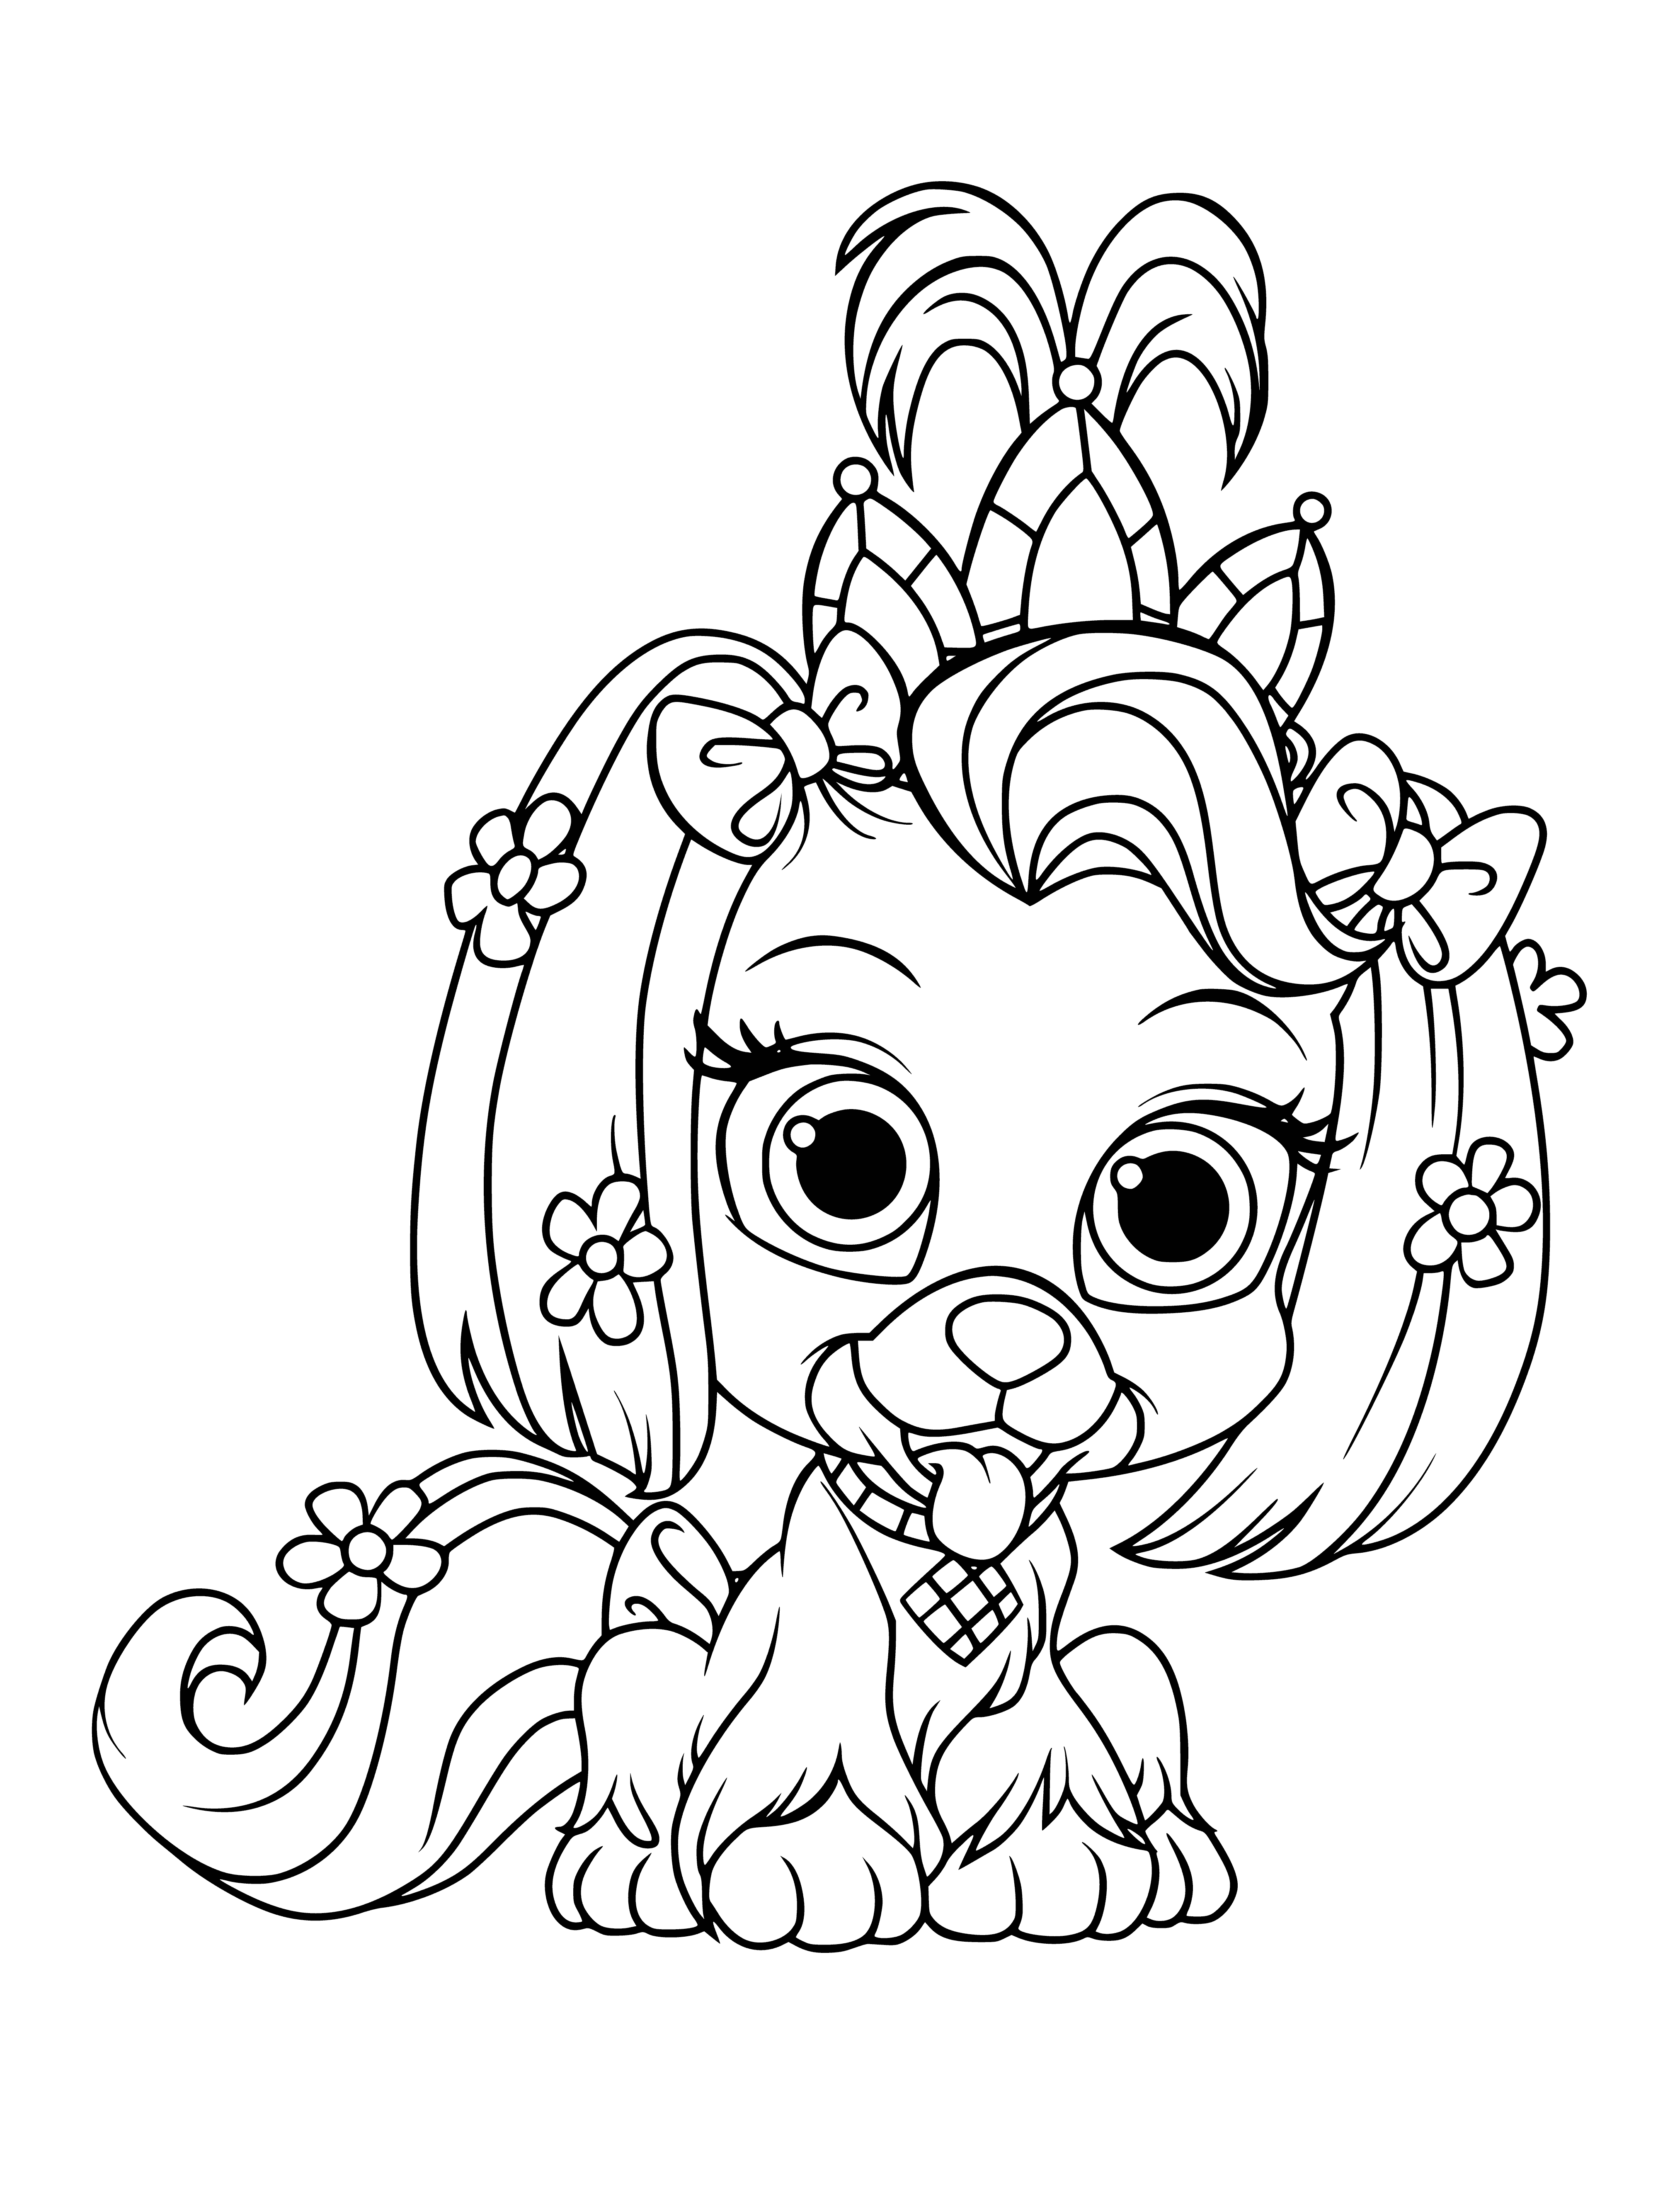 coloring page: Chamomile puppy & Rapunzel pet coloring page: small white w/black spots, brown/white wearing pink collar. #coloringpages